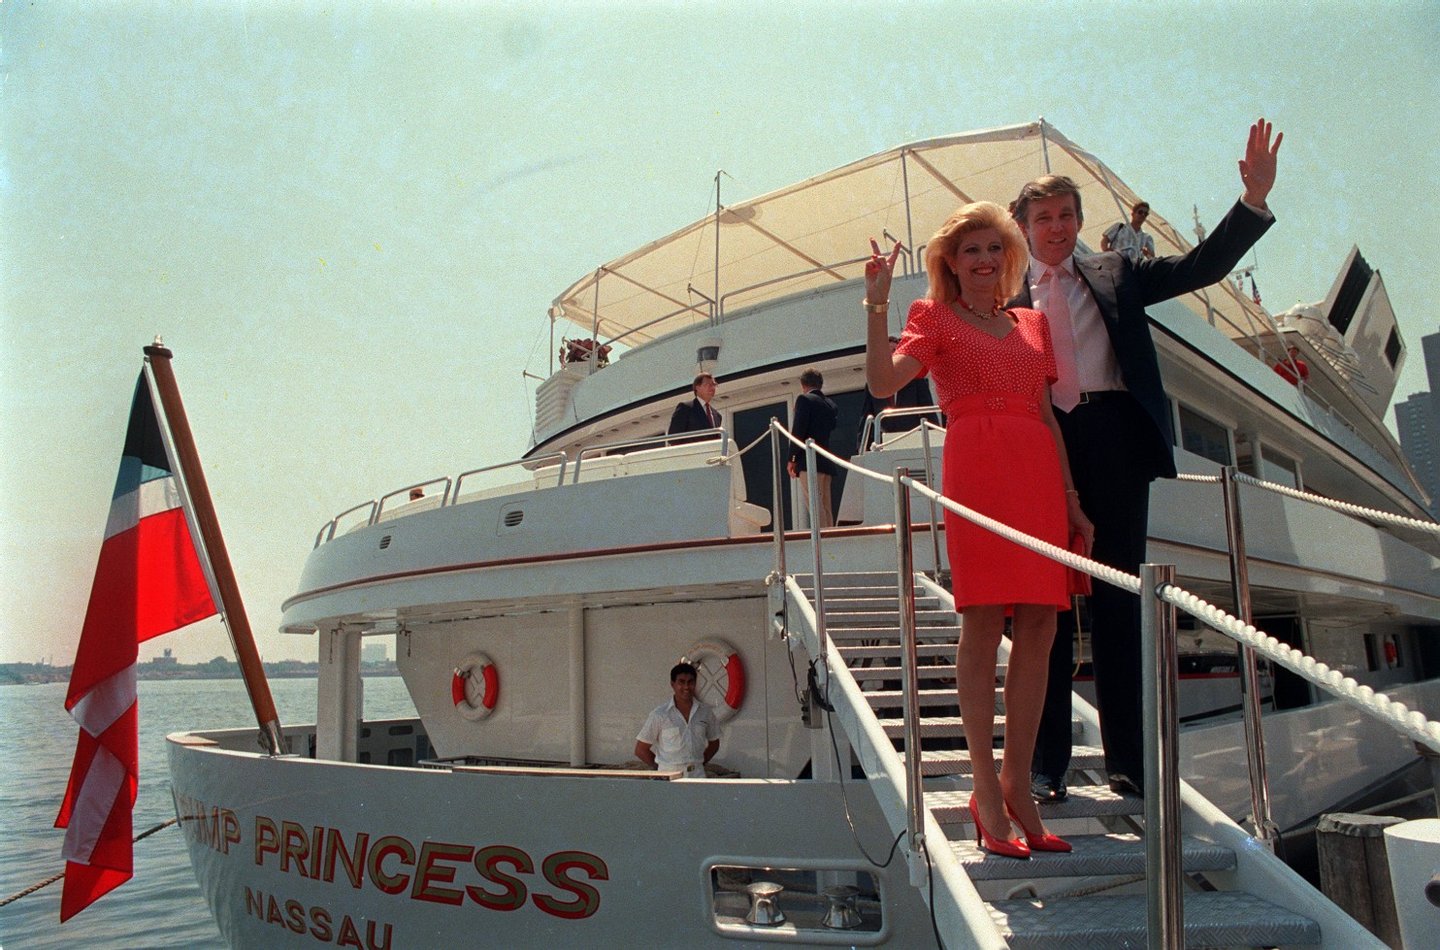 Trump with his first wife, Ivana, in 1988 on the Trump Princess, which he sold three years later